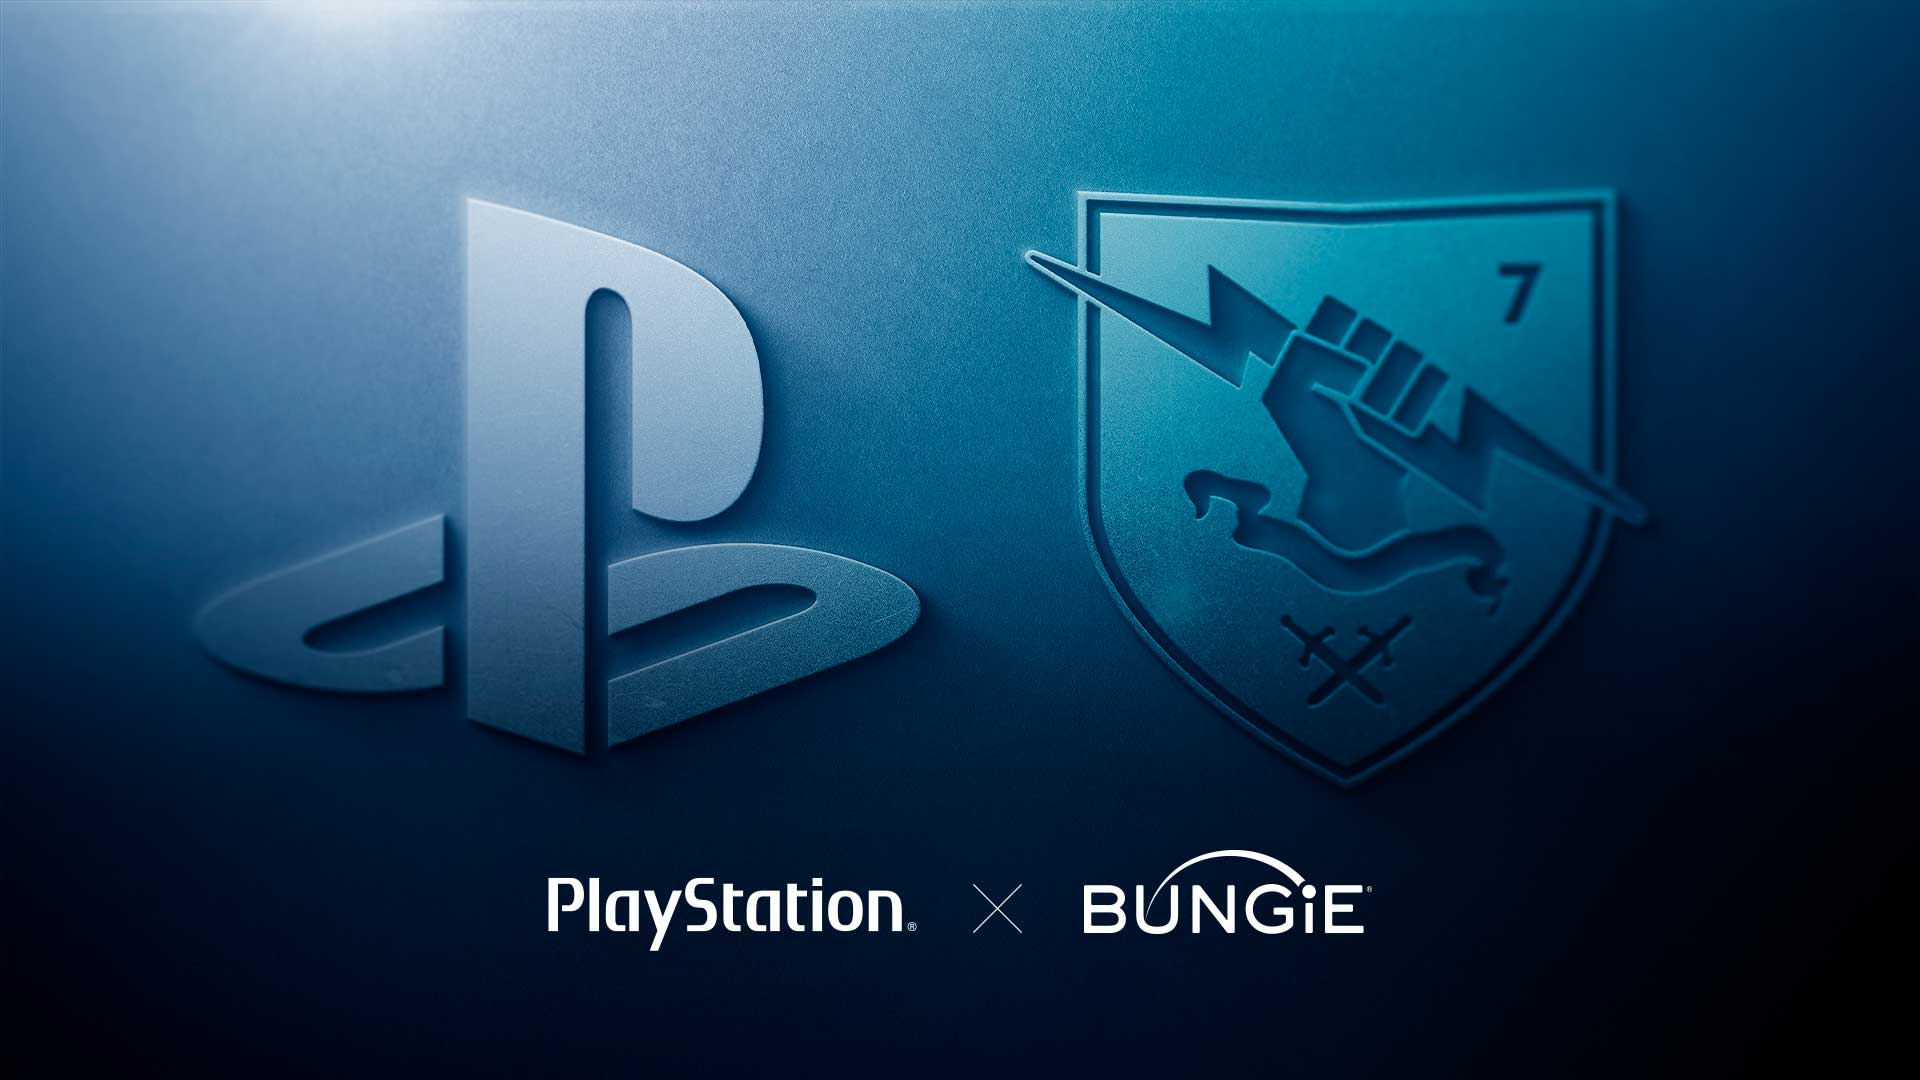 sony interactive entertainment play station bungie  Image of sony interactive entertainment play station bungie